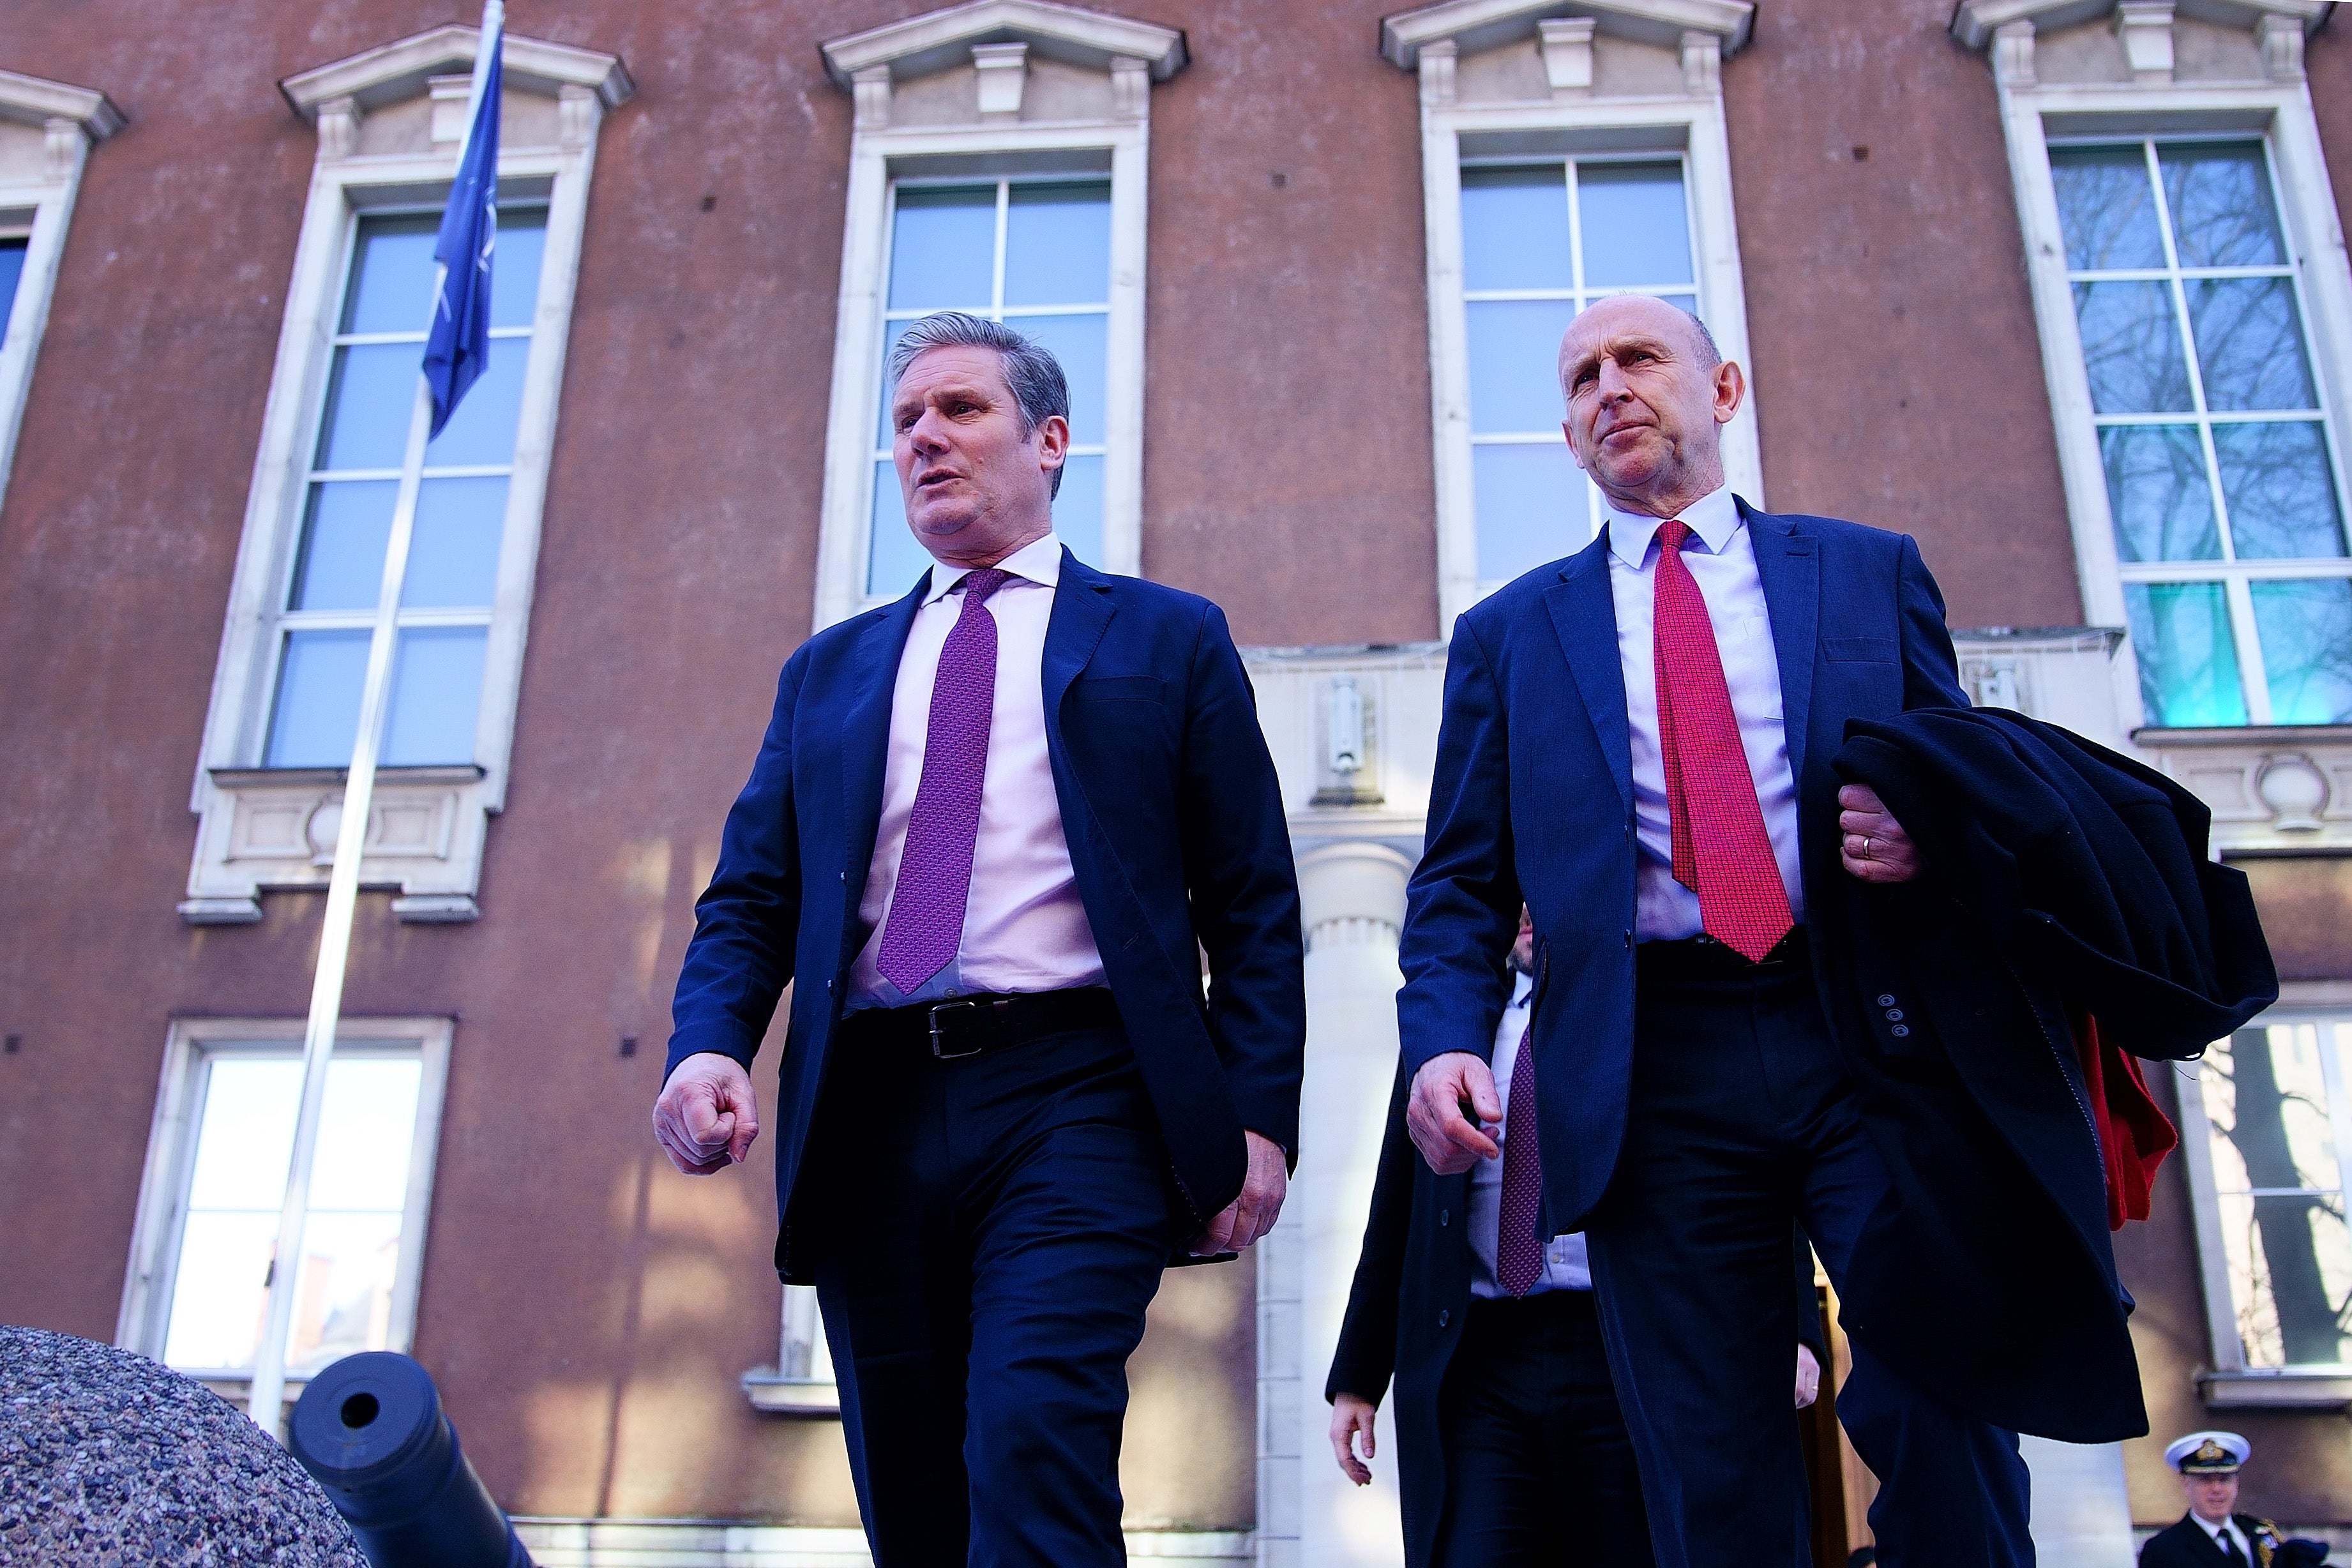 Labour leader Sir Keir Starmer and shadow defence secretary John Healey leave the defence ministry in Tallinn after meeting Estonian defence minister Kalle Laanet (Victoria Jones/PA)